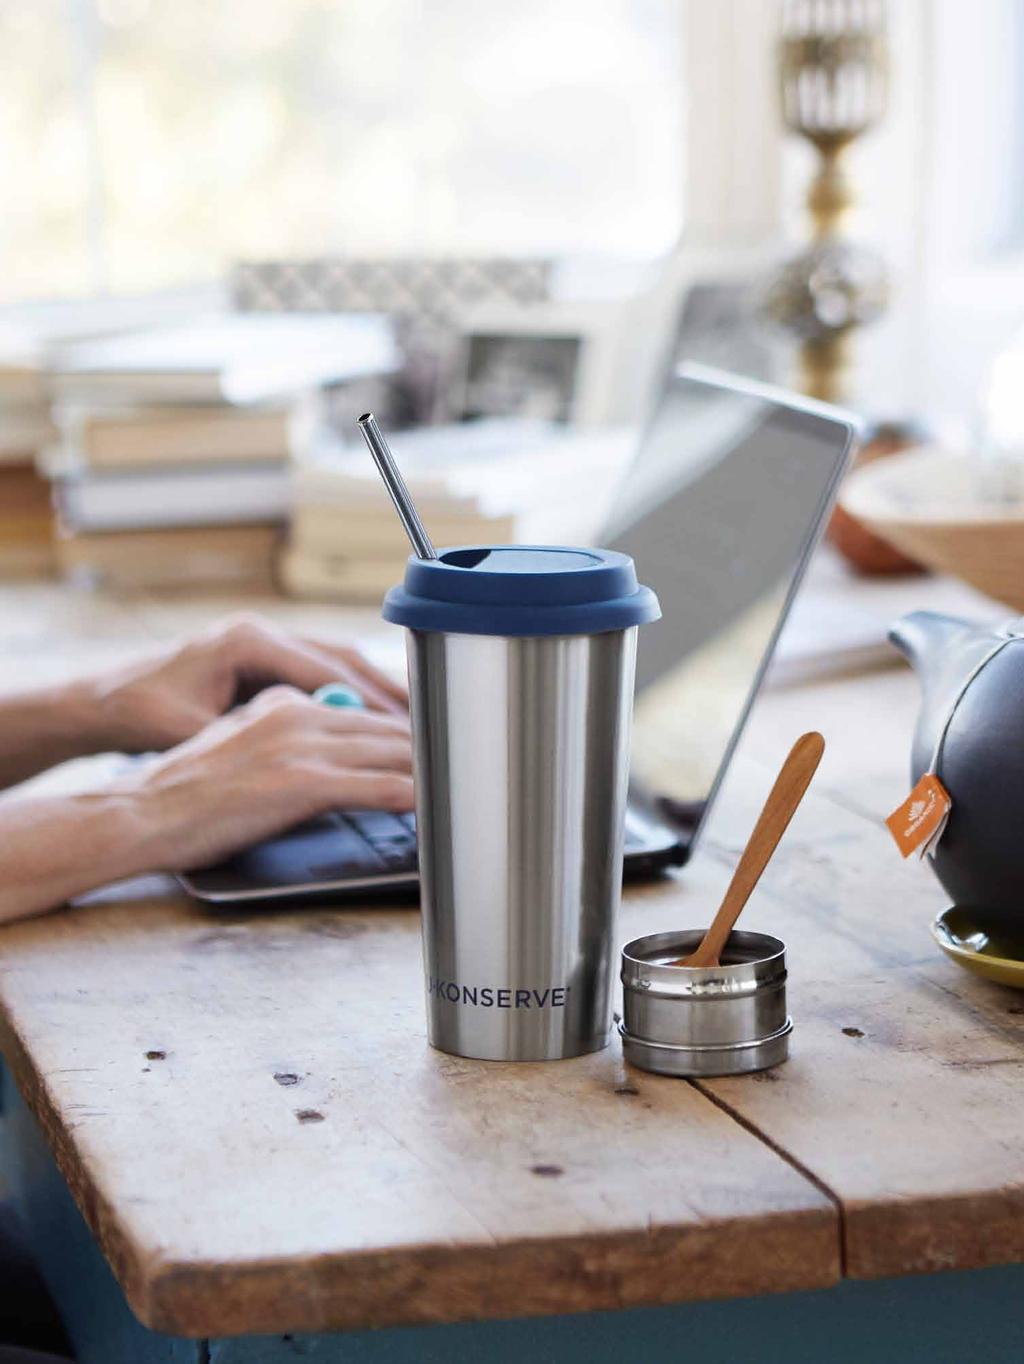 CONTAINERS Stainless steel straws help eliminate the 500 million plastic